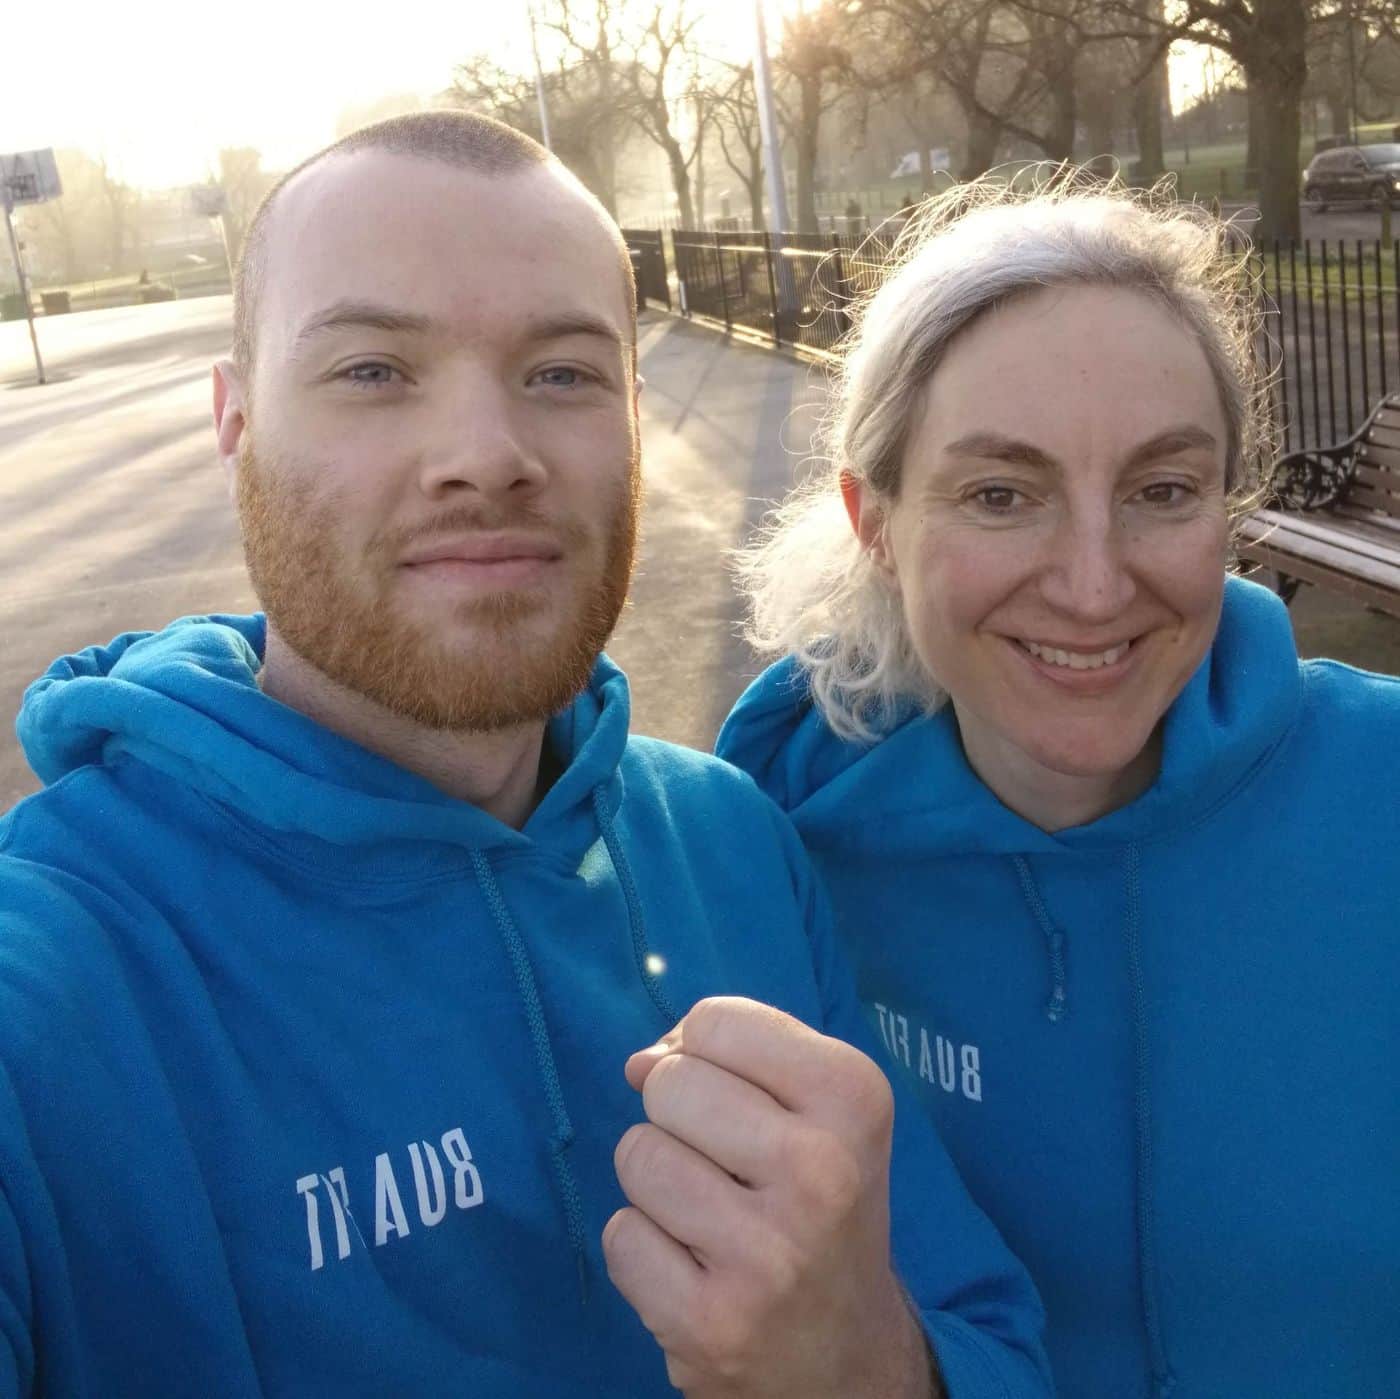 I taught my first BUA FIT Boxing session in Clapham Common this morning! With the 7:45AM start we got to see the sun rise! Great start to the day 💪🏻💥